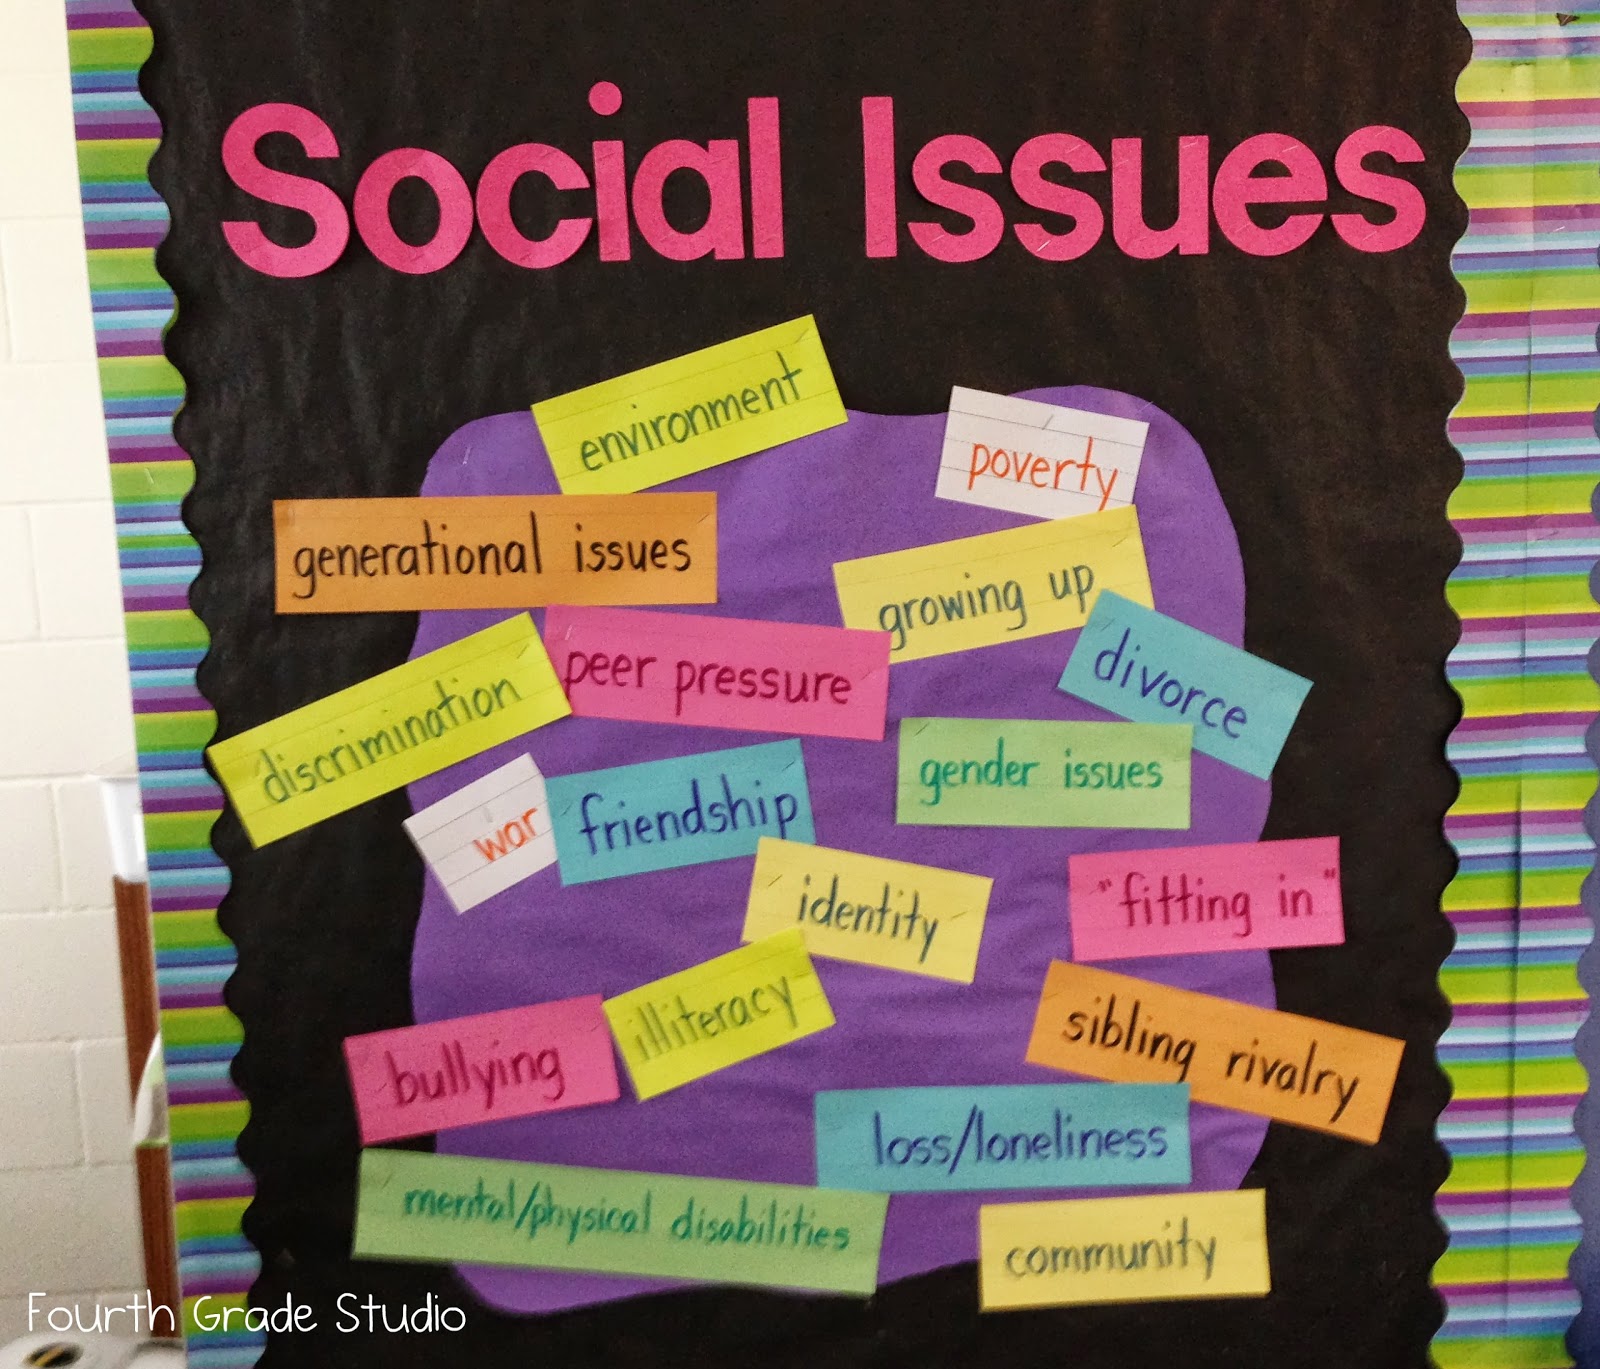 Society problems. Social Issues. Social Issues list. Social problems. Social Issues topic.